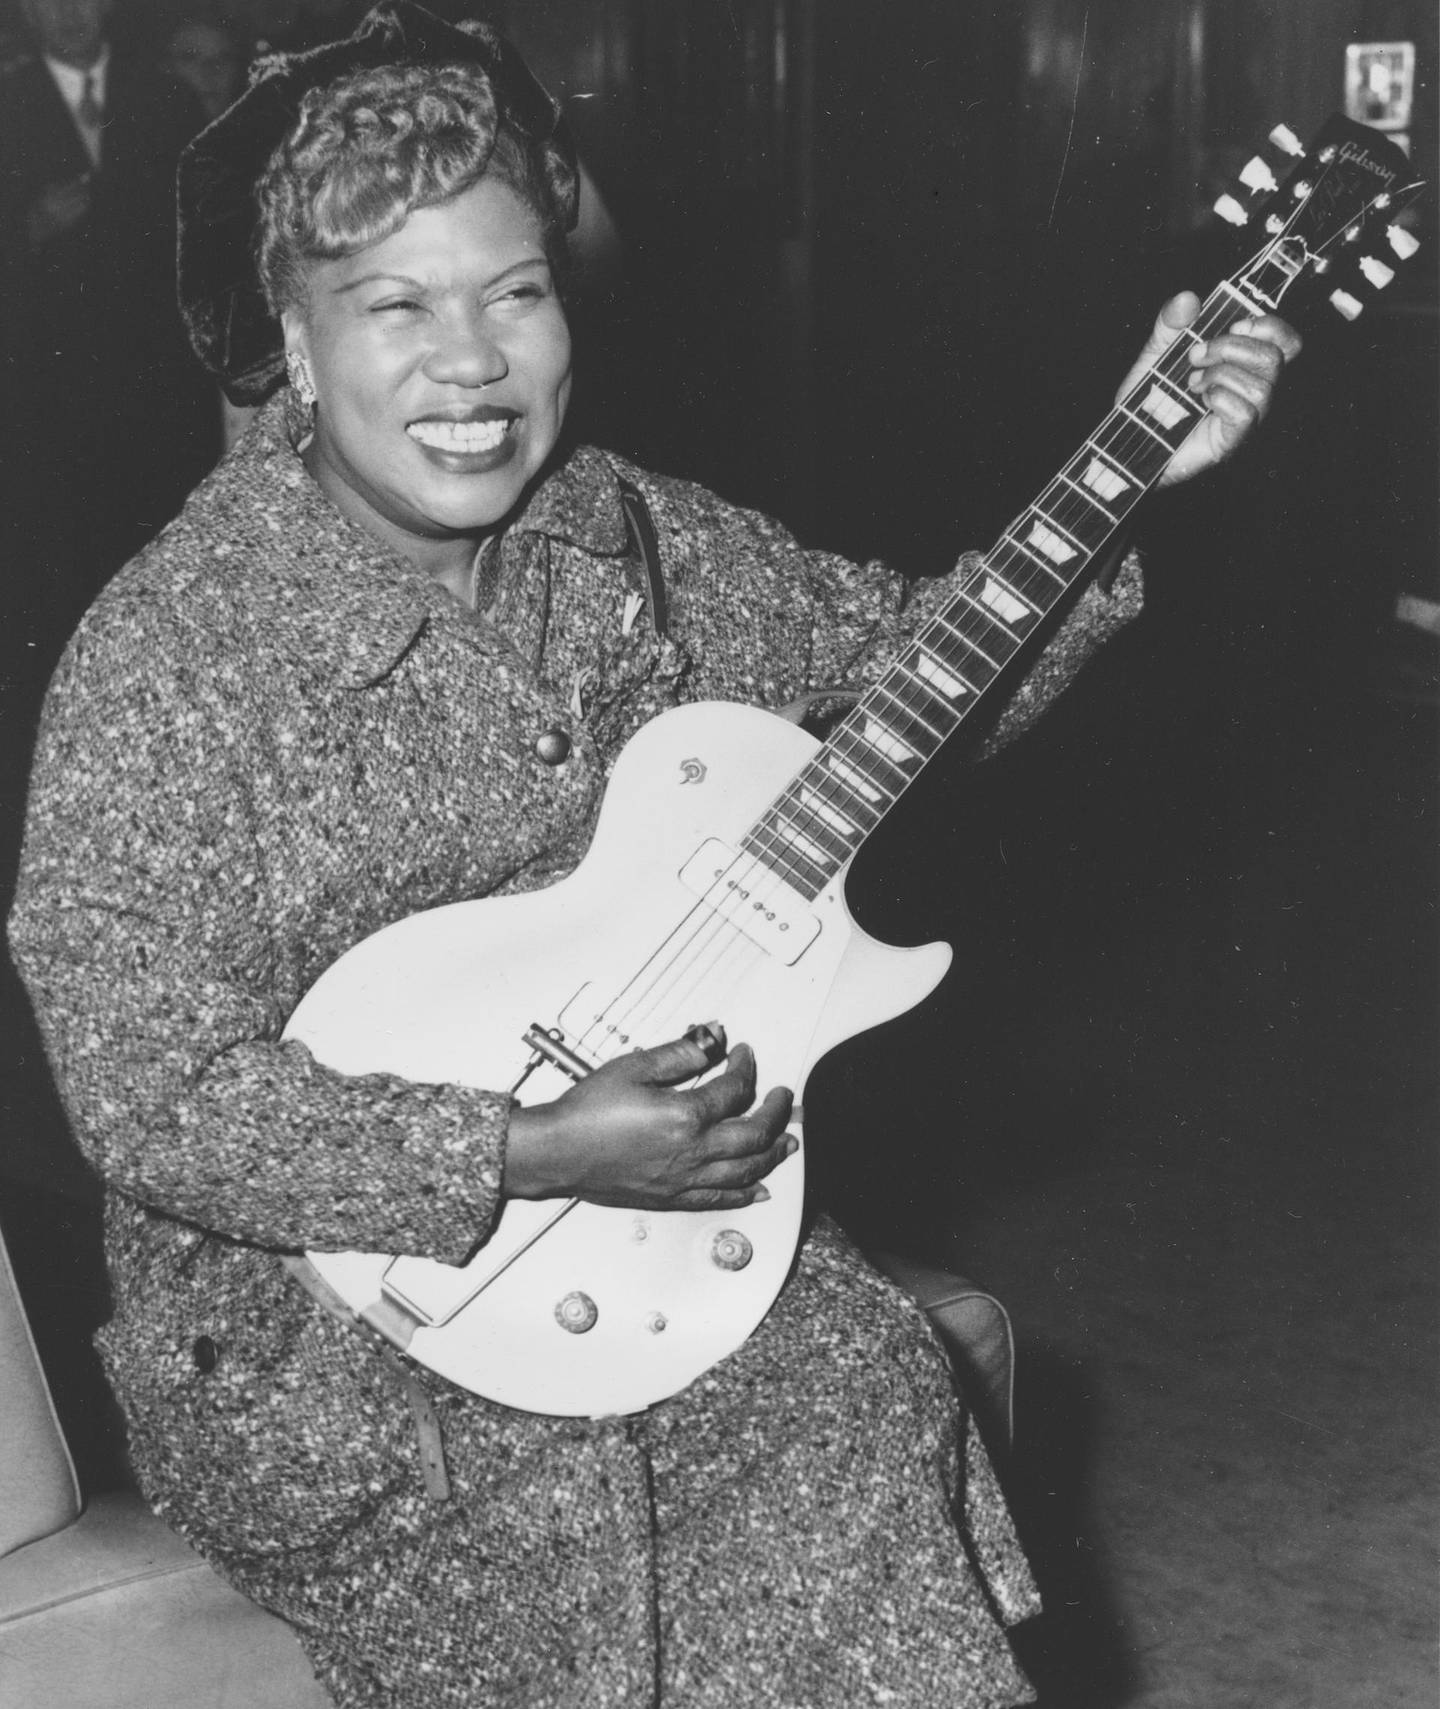 FILE- In this Nov. 21, 1957, file photo, Sister Rosetta Tharpe, guitar-playing American gospel singer, gives an inpromptu performance in a lounge at London Airport, following her arrival from New York. Tharpe, who died in 1973, will be inducted with the â€œAward for Early Influence" to the Rock and Roll Hall of Fame on April 14, 2018 in Cleveland, Ohio. (AP Photo, File)